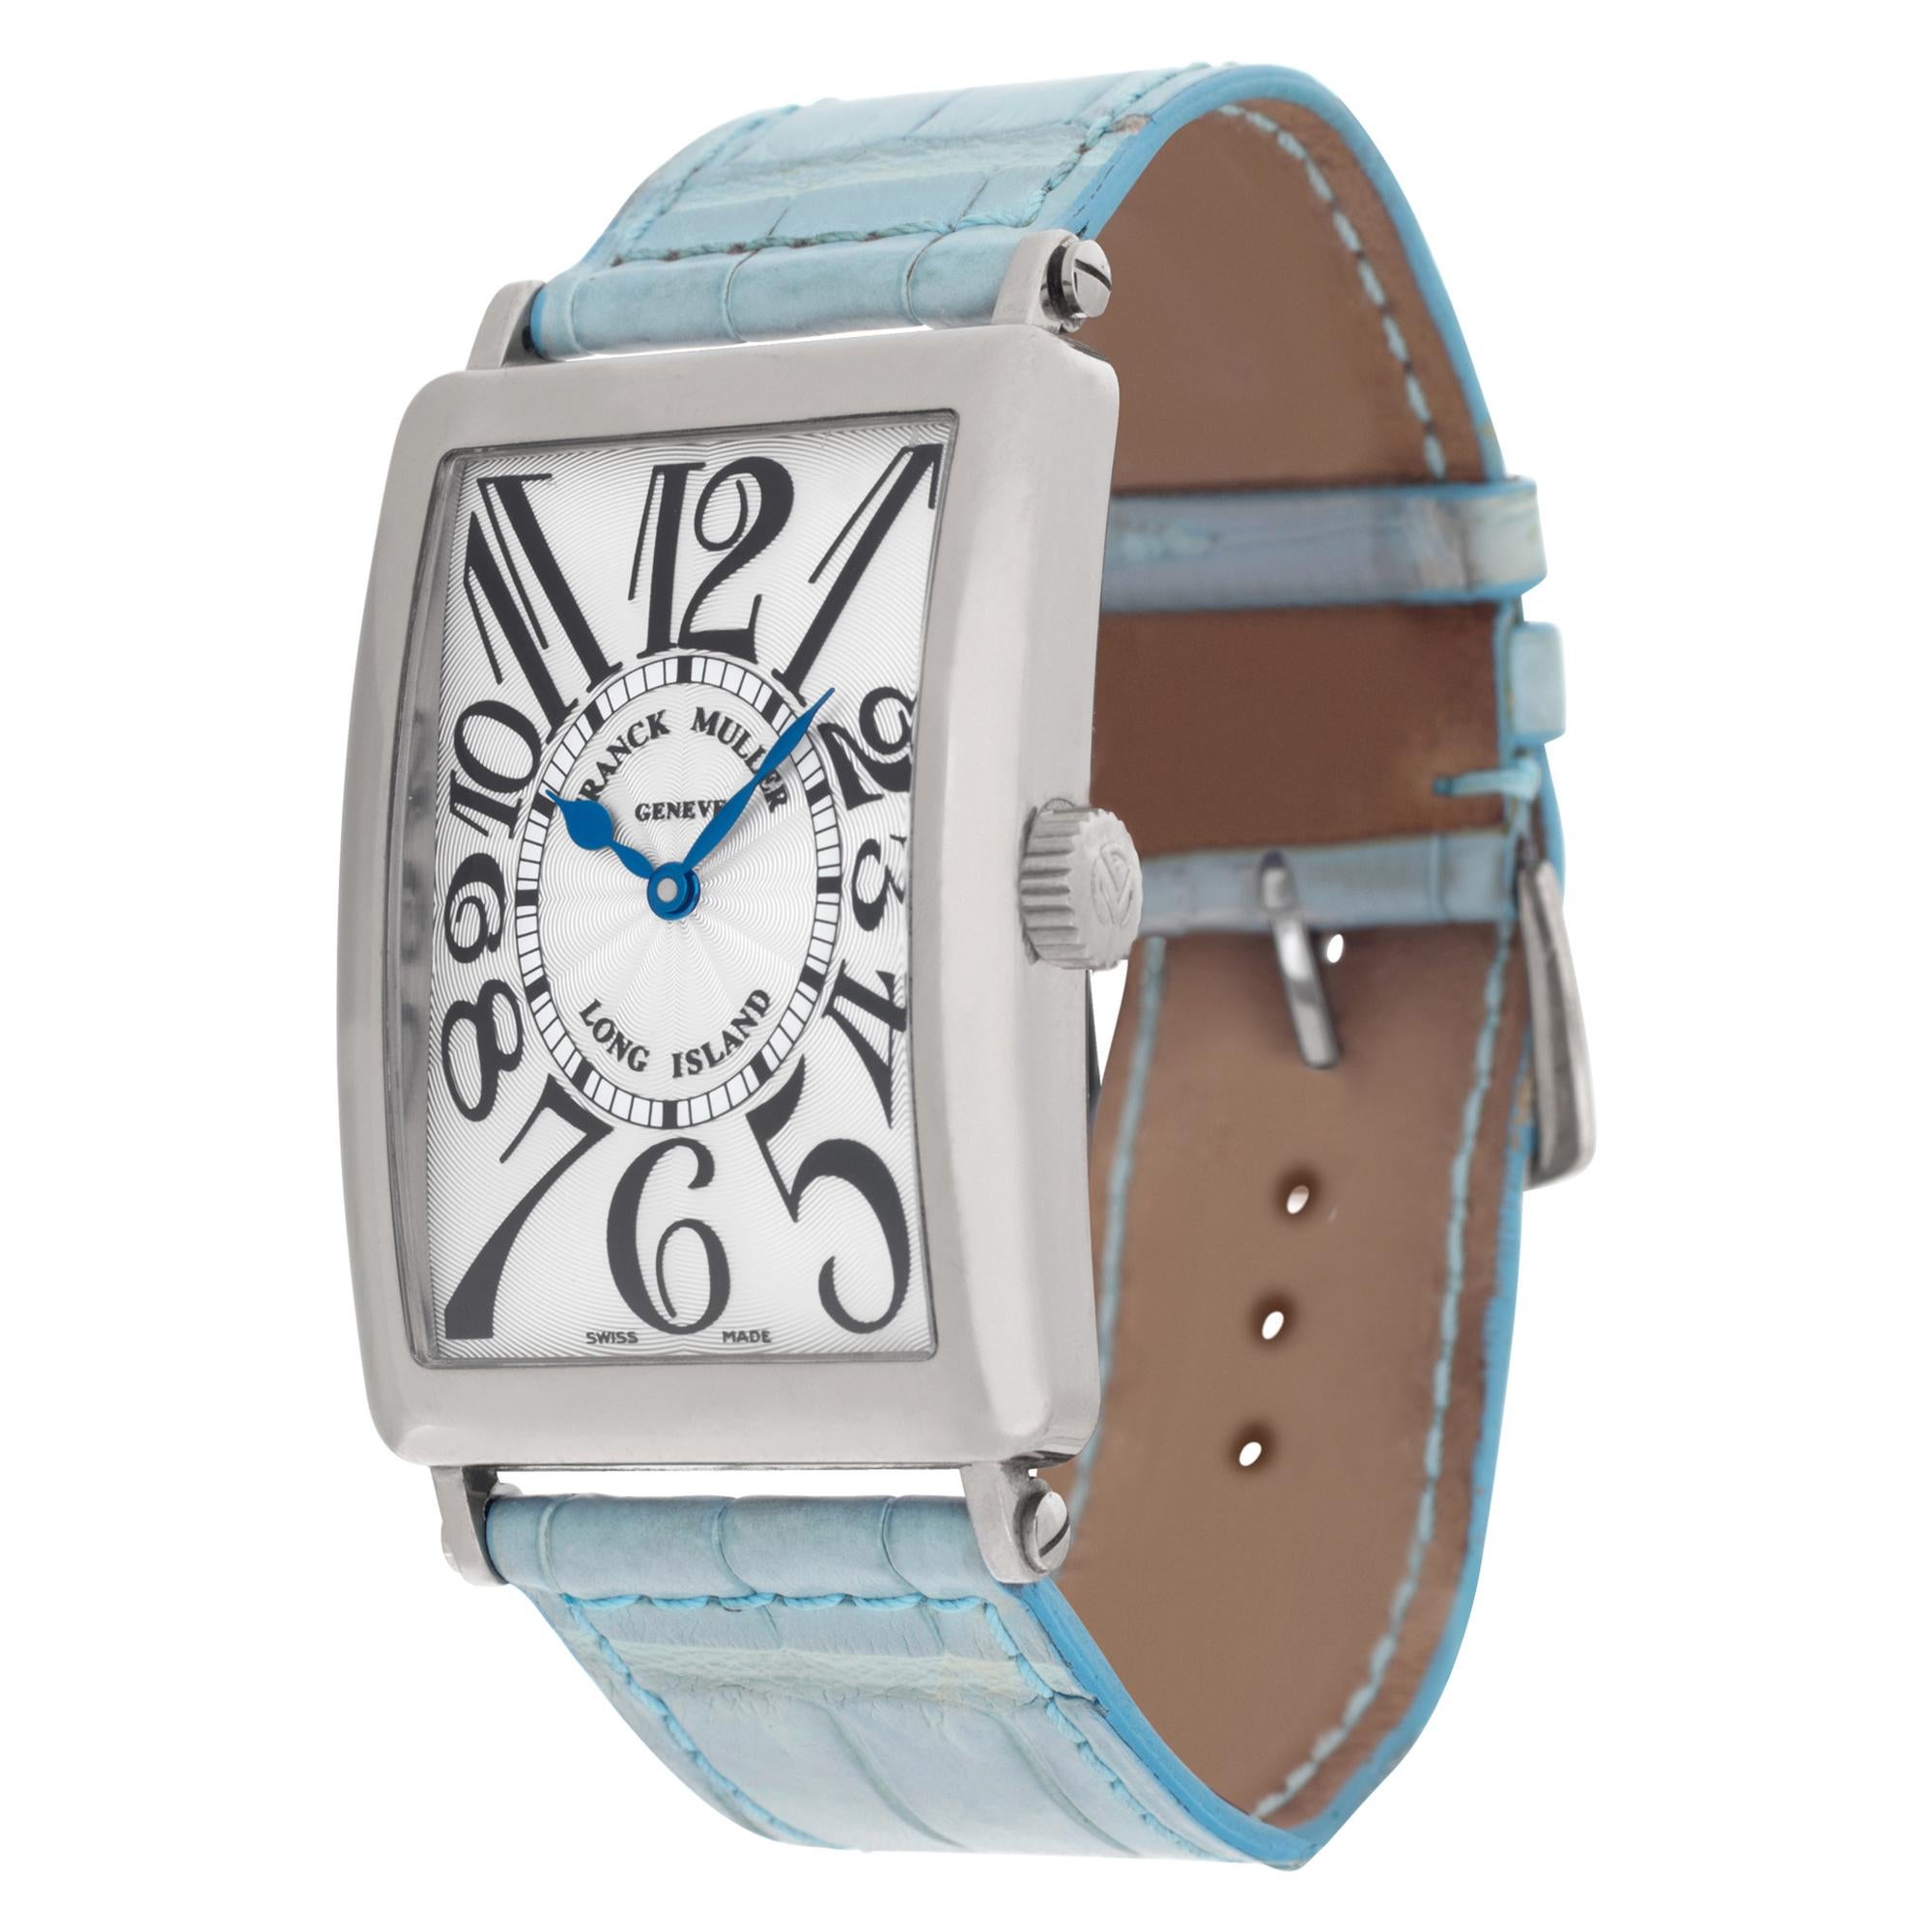 Franck Muller Long Island in 18k white gold on a powder blue alligator strap with 18k white gold FM tang buckle. Auto. 30.5 mm case size. Ref 1000SC. Comes with additional brand new peach colored strap. Fine Pre-owned Franck Muller Watch.

Certified